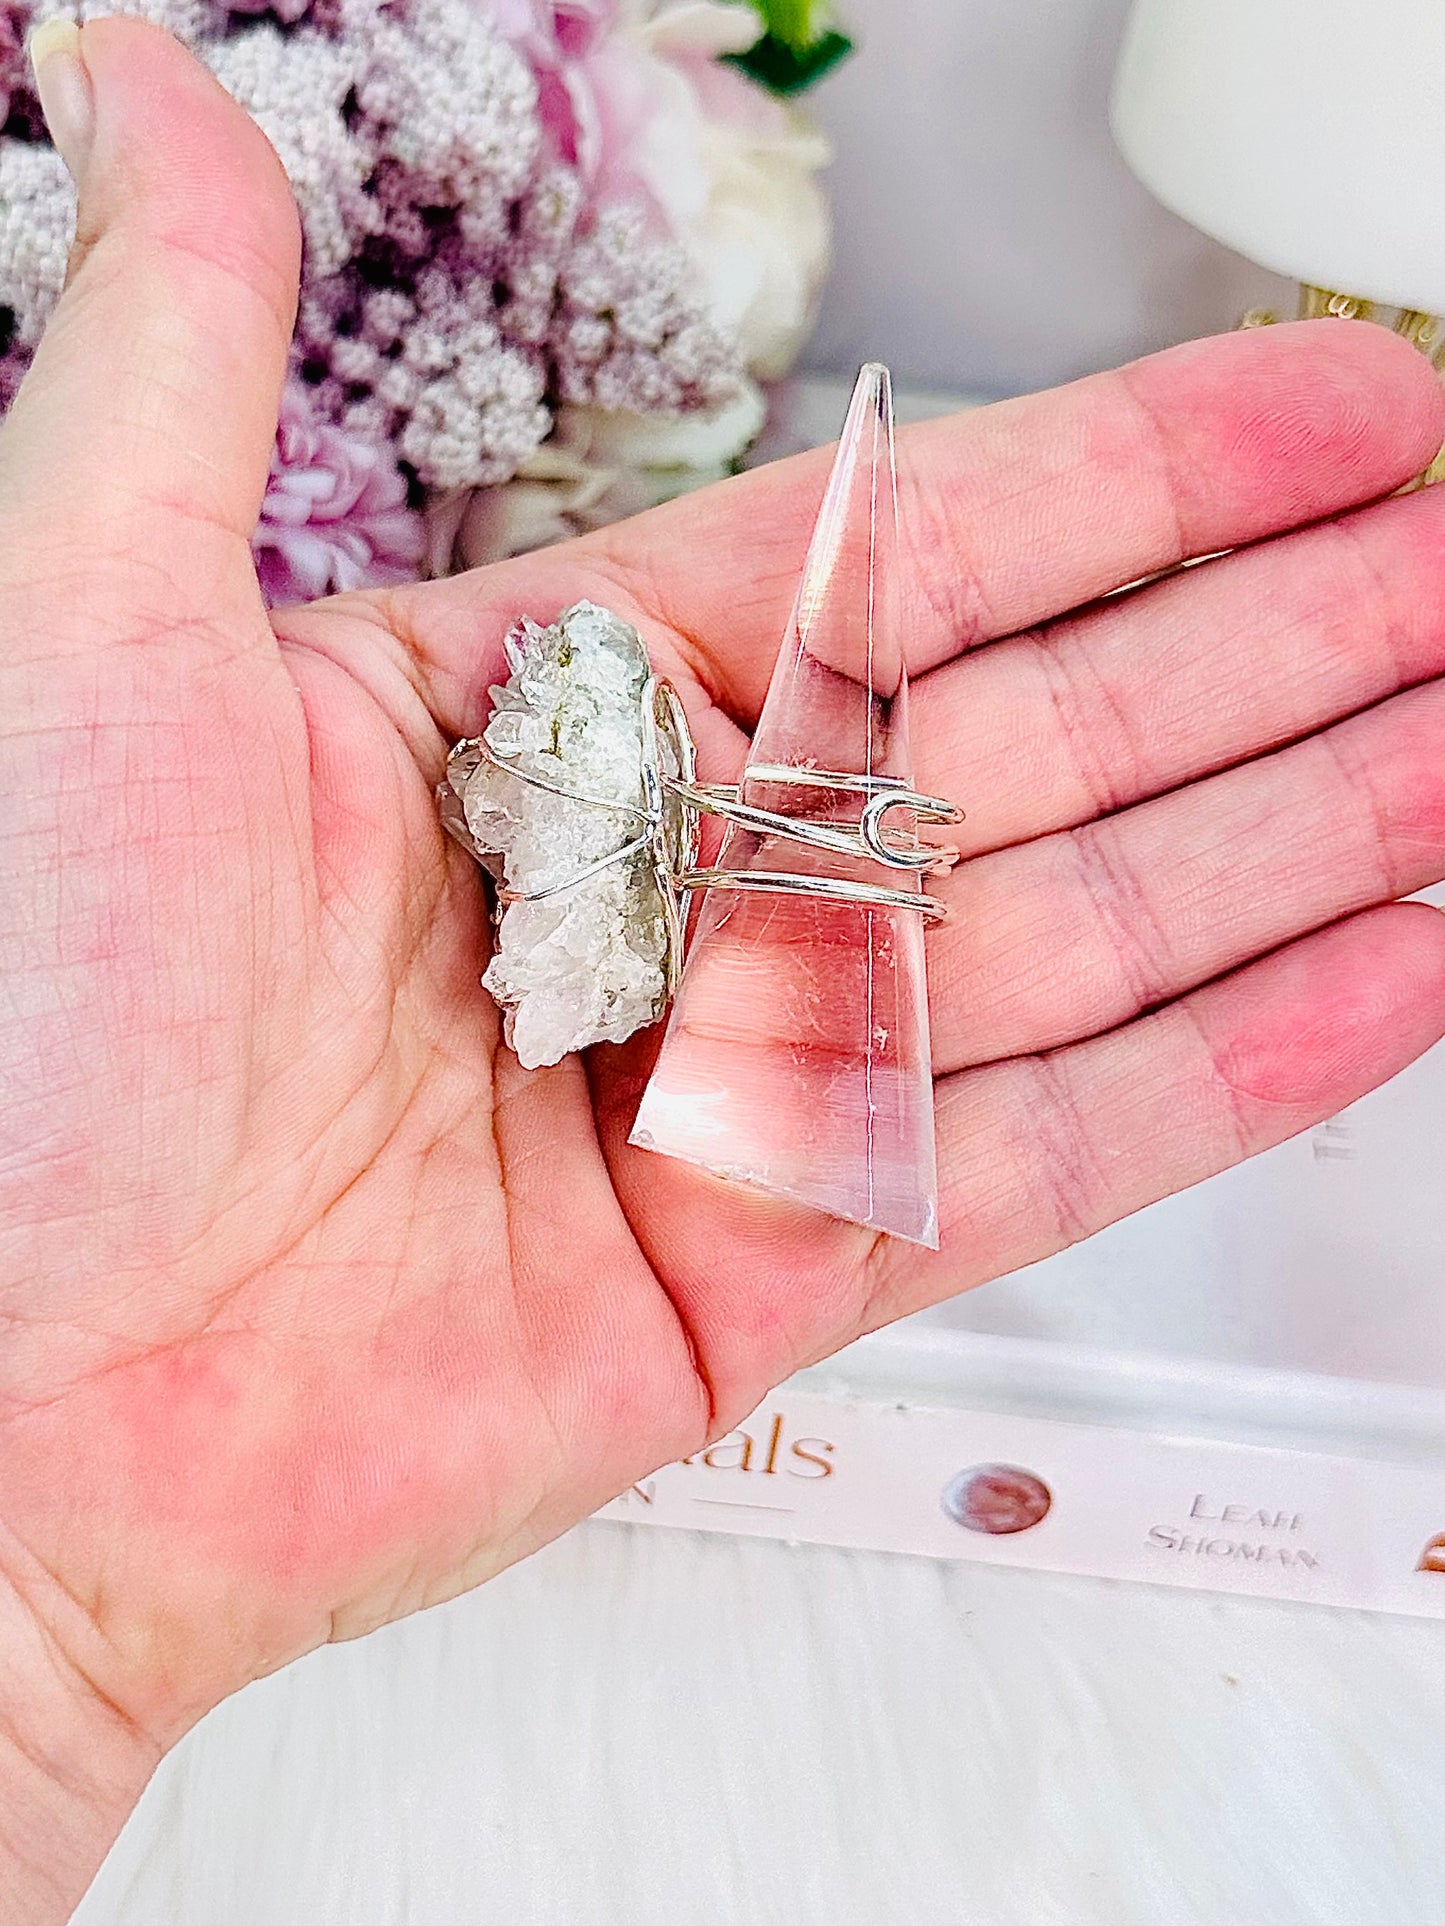 She’s A Stunner! Chunky Large Natural Clear Quartz Adjustable Silver Ring From Brazil In Gift Bag